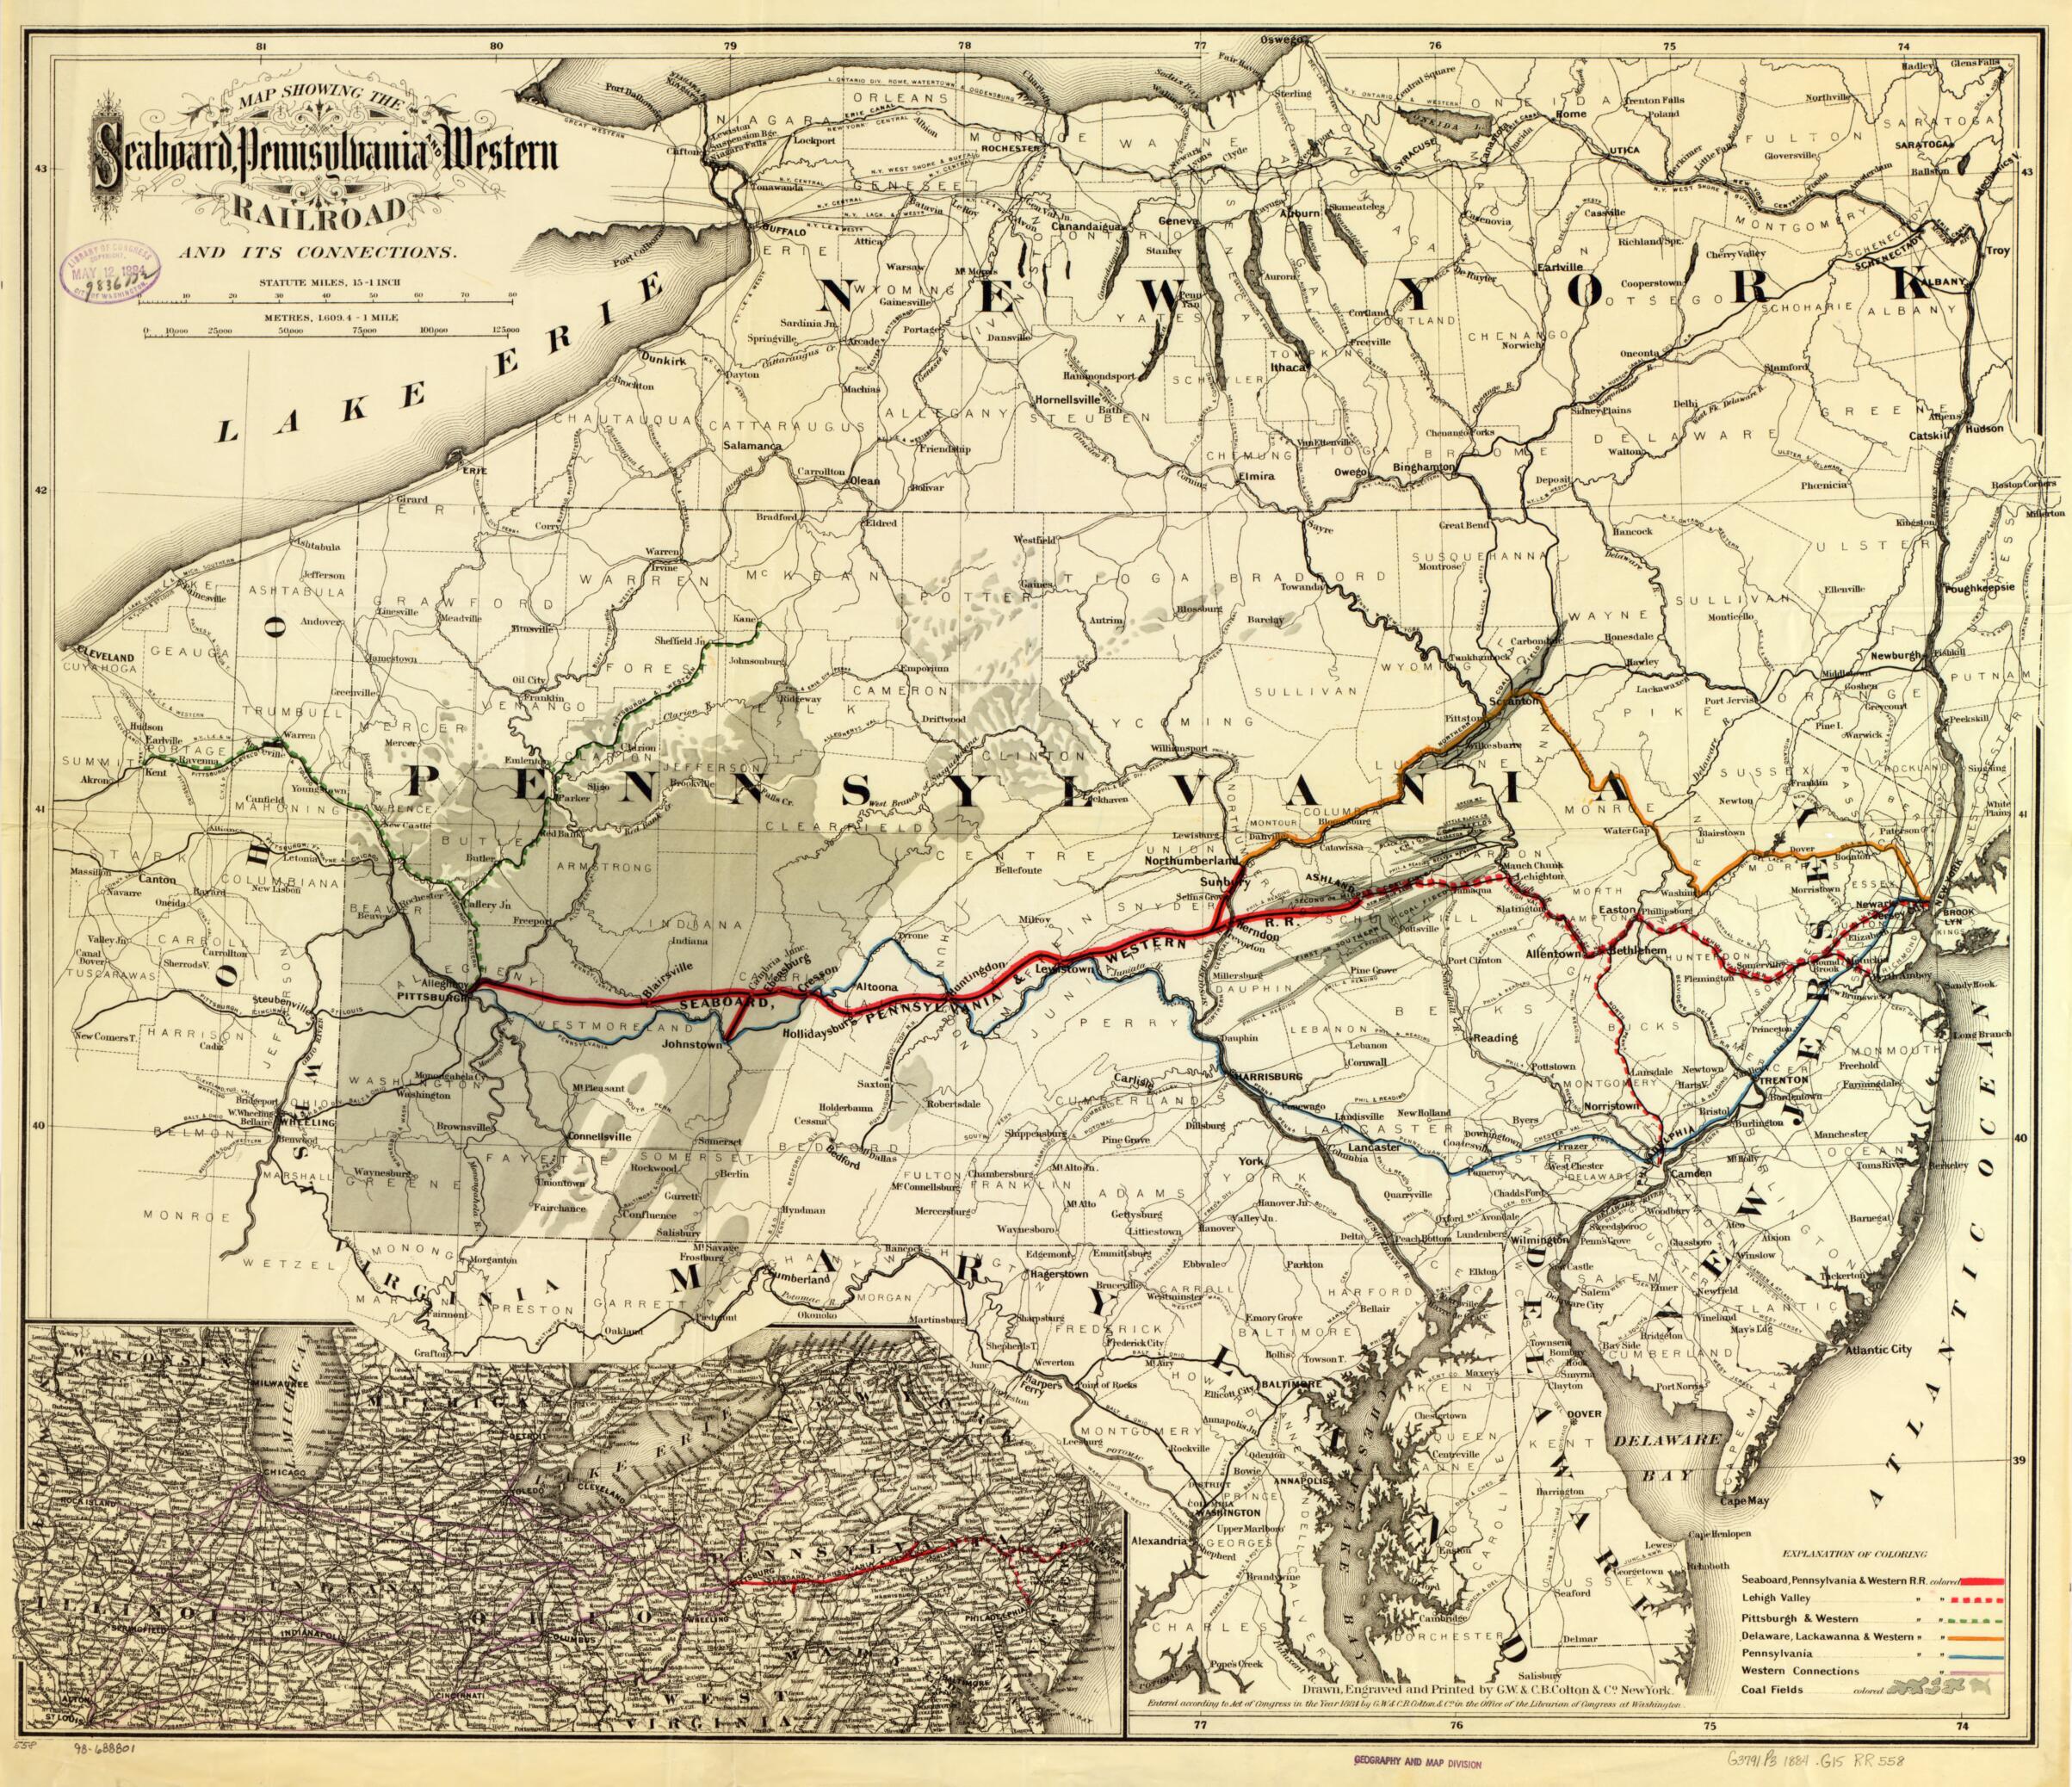 This old map of Map Showing the Seaboard, Pennsylvania and Western Railroad and Its Connections from 1884 was created by  G.W. &amp; C.B. Colton &amp; Co, Pennsylvania Seaboard in 1884